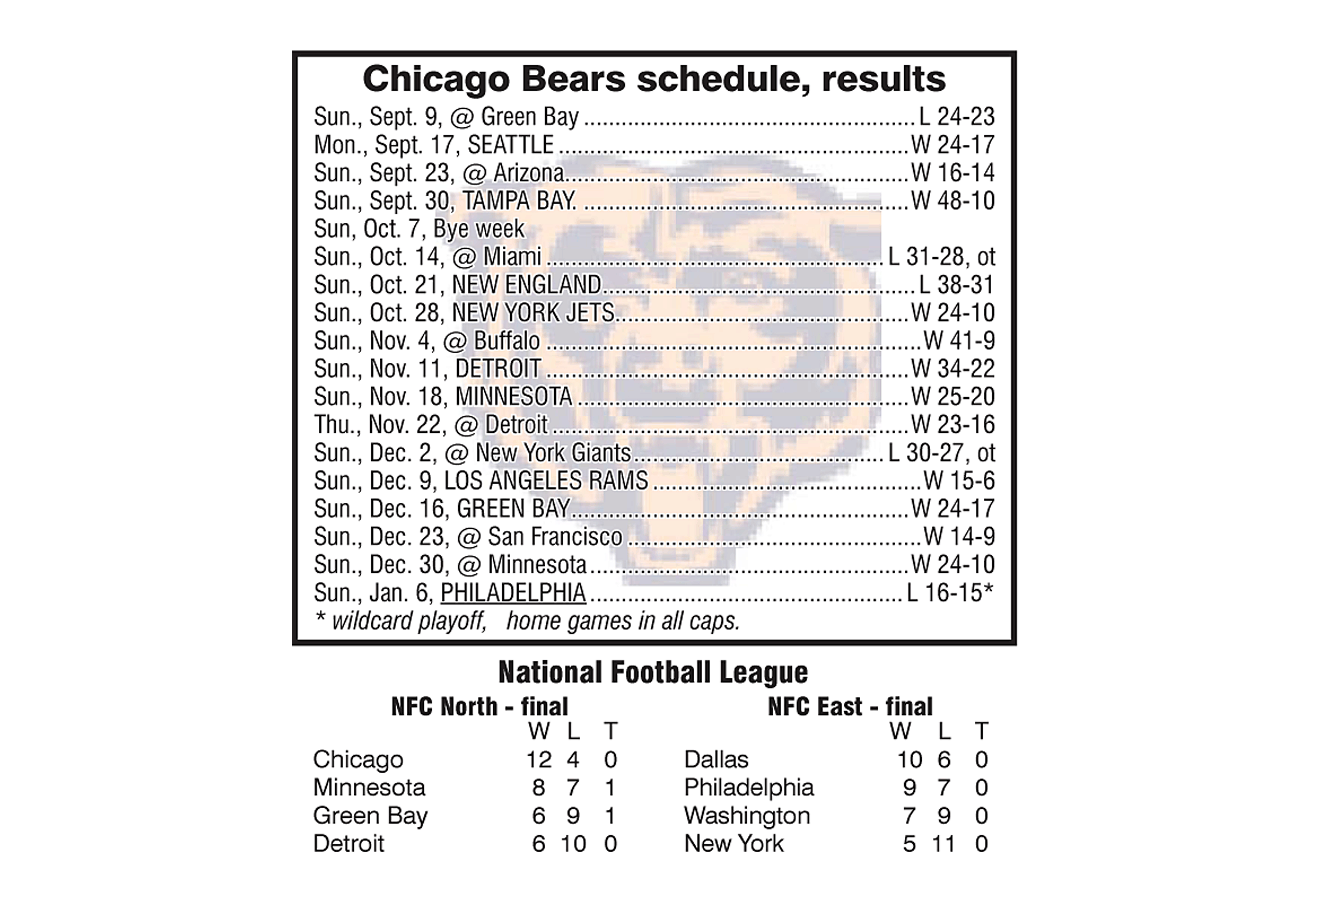 Chicago Bears 2018 schedule and results through January 6, 2019